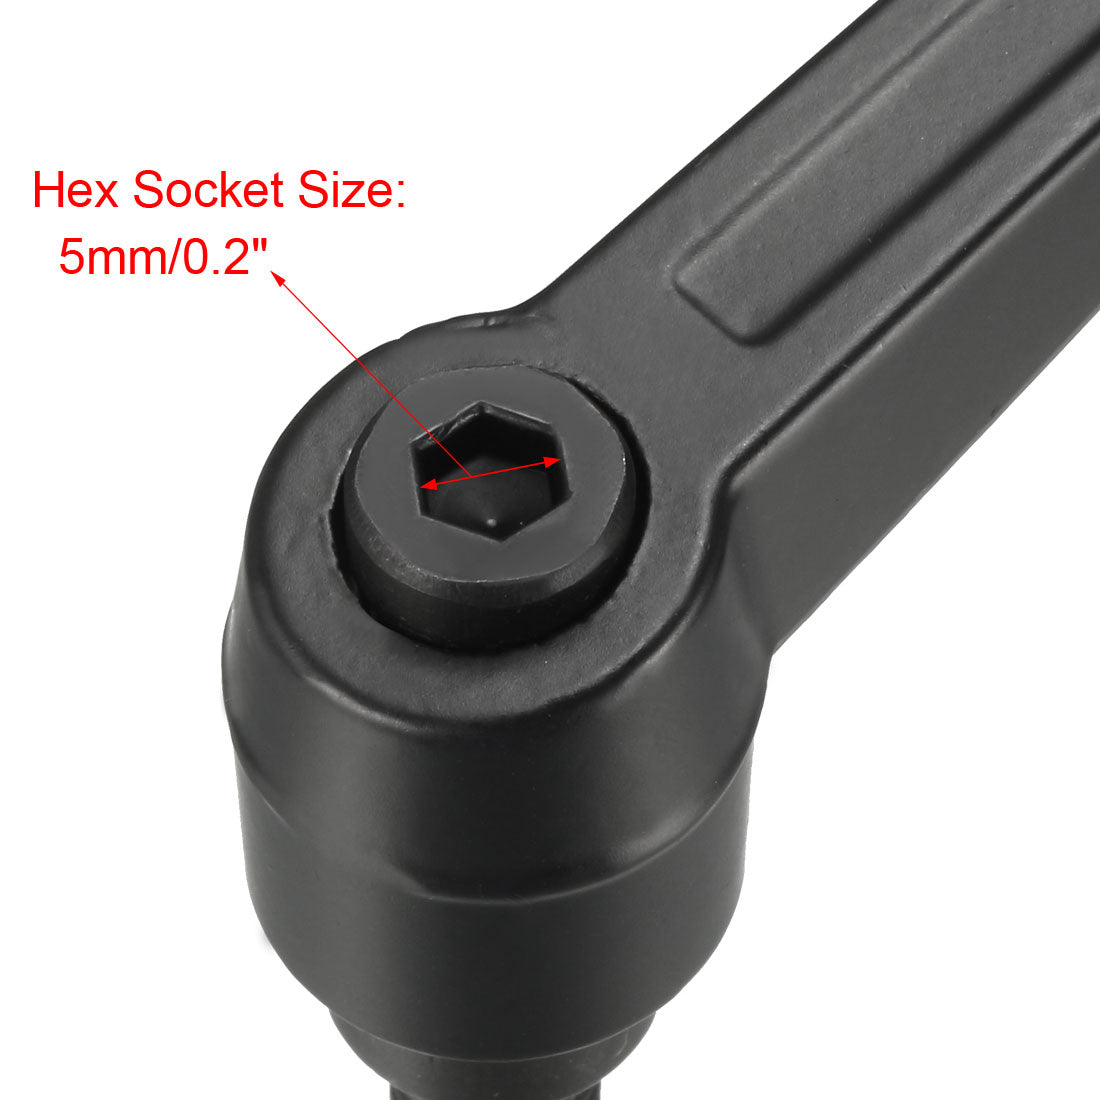 uxcell Uxcell Handles Adjustable Clamping Lever Thread Ratchet Male Threaded Stud 2Pack